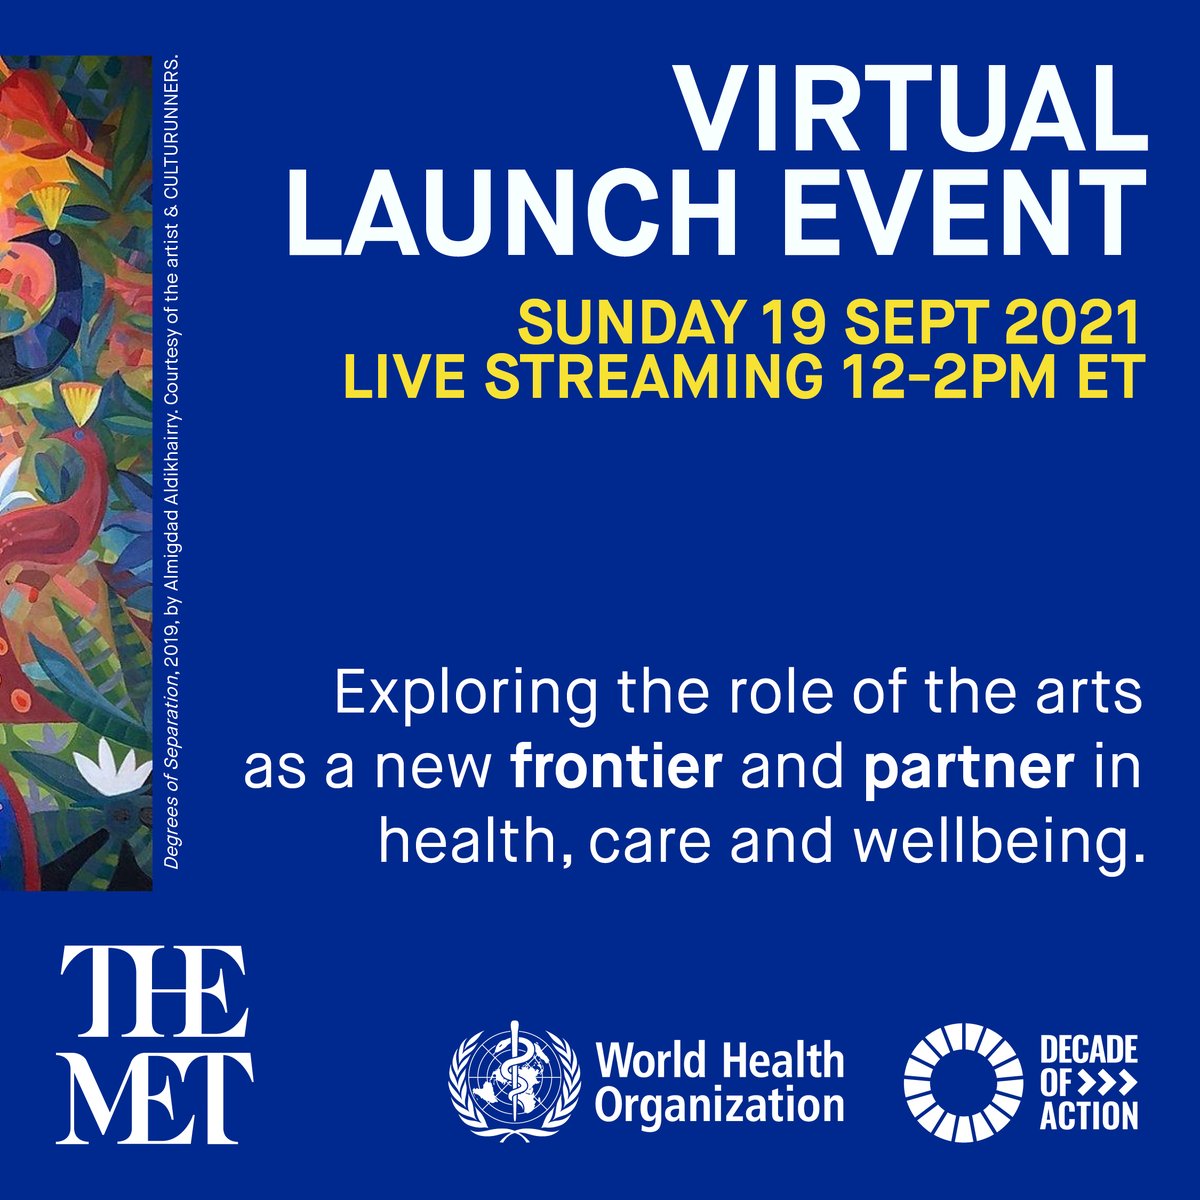 This SUNDAY: Join leading artists, policymakers, and academics for an exciting event exploring the #arts as a new frontier in health, care, and wellbeing. @WHO @metmuseum @CULTURUNNERS @nyusteinhardt @AspenInstitute @GlobalGoalsUN @UN Register: ow.ly/R0GI50G6DW5